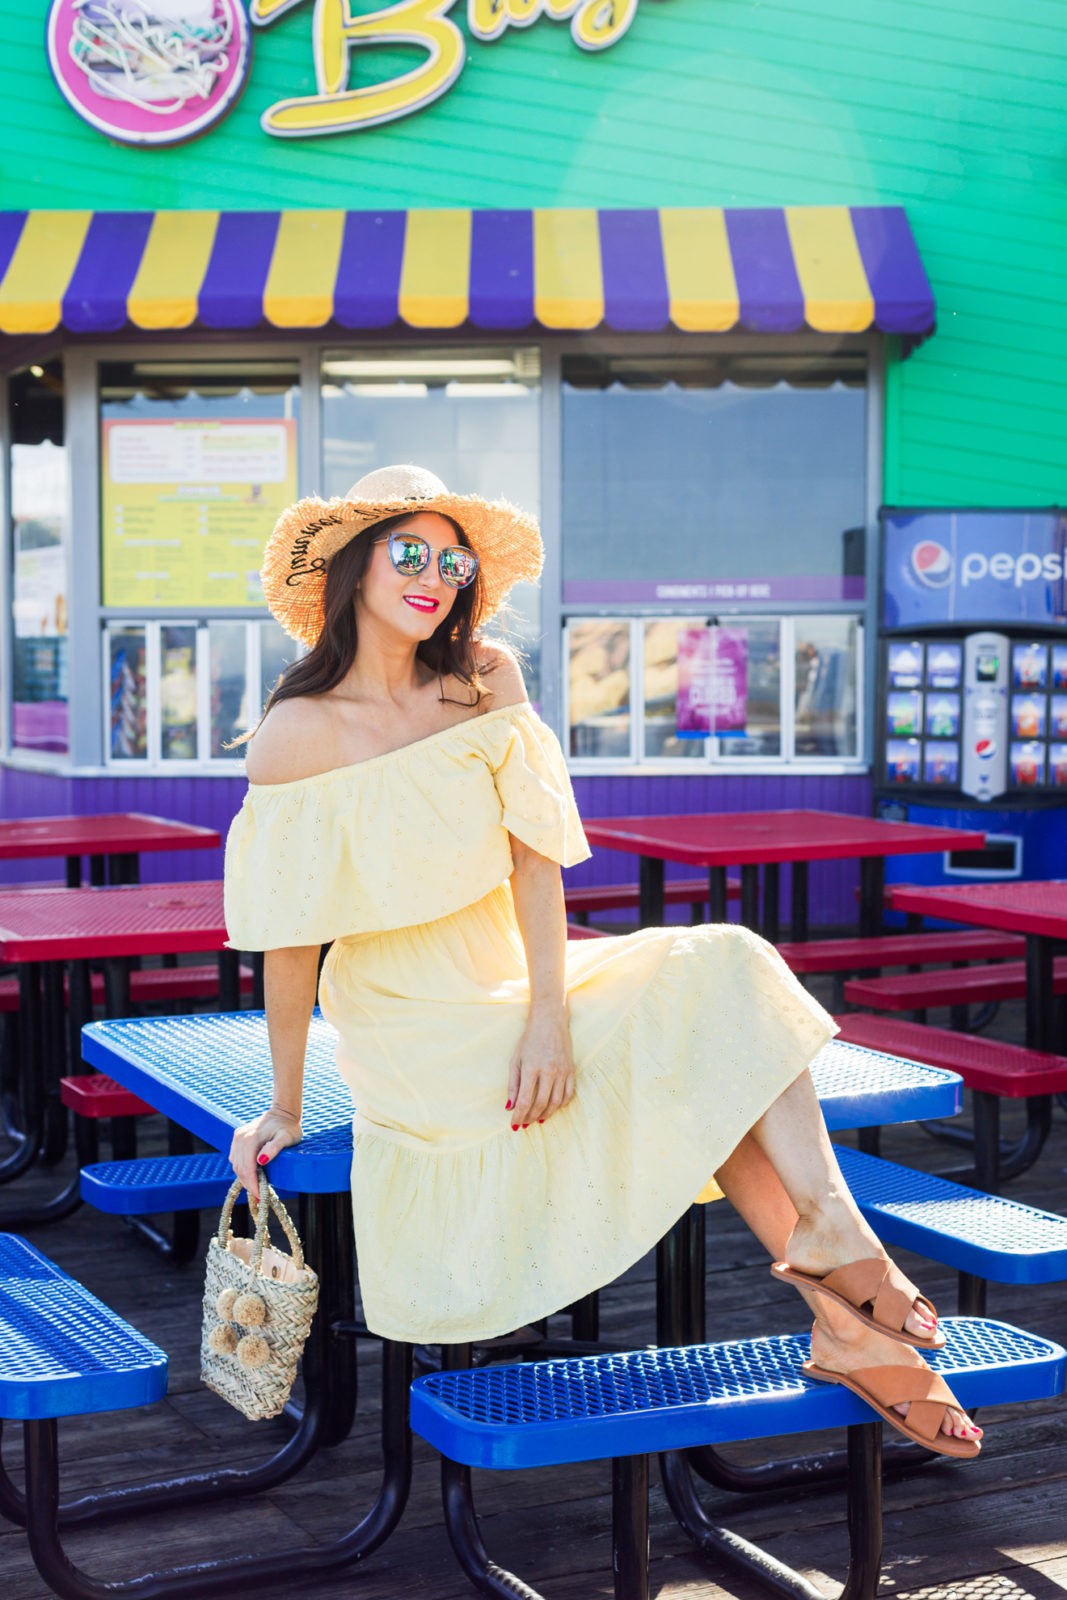 Cute Summer Dresses Under 50, Summer Fashion Trends Walmart We Dress America by popular Los Angeles Fashion Blogger Laura Lily: image of woman wearing  Walmart embroidered straw sun hat, sunglasses, Melrose Ave vegan brown slide sandals, Walmart woven pom handbag, and Walmart off the shoulder light yellow eyelet dress. 